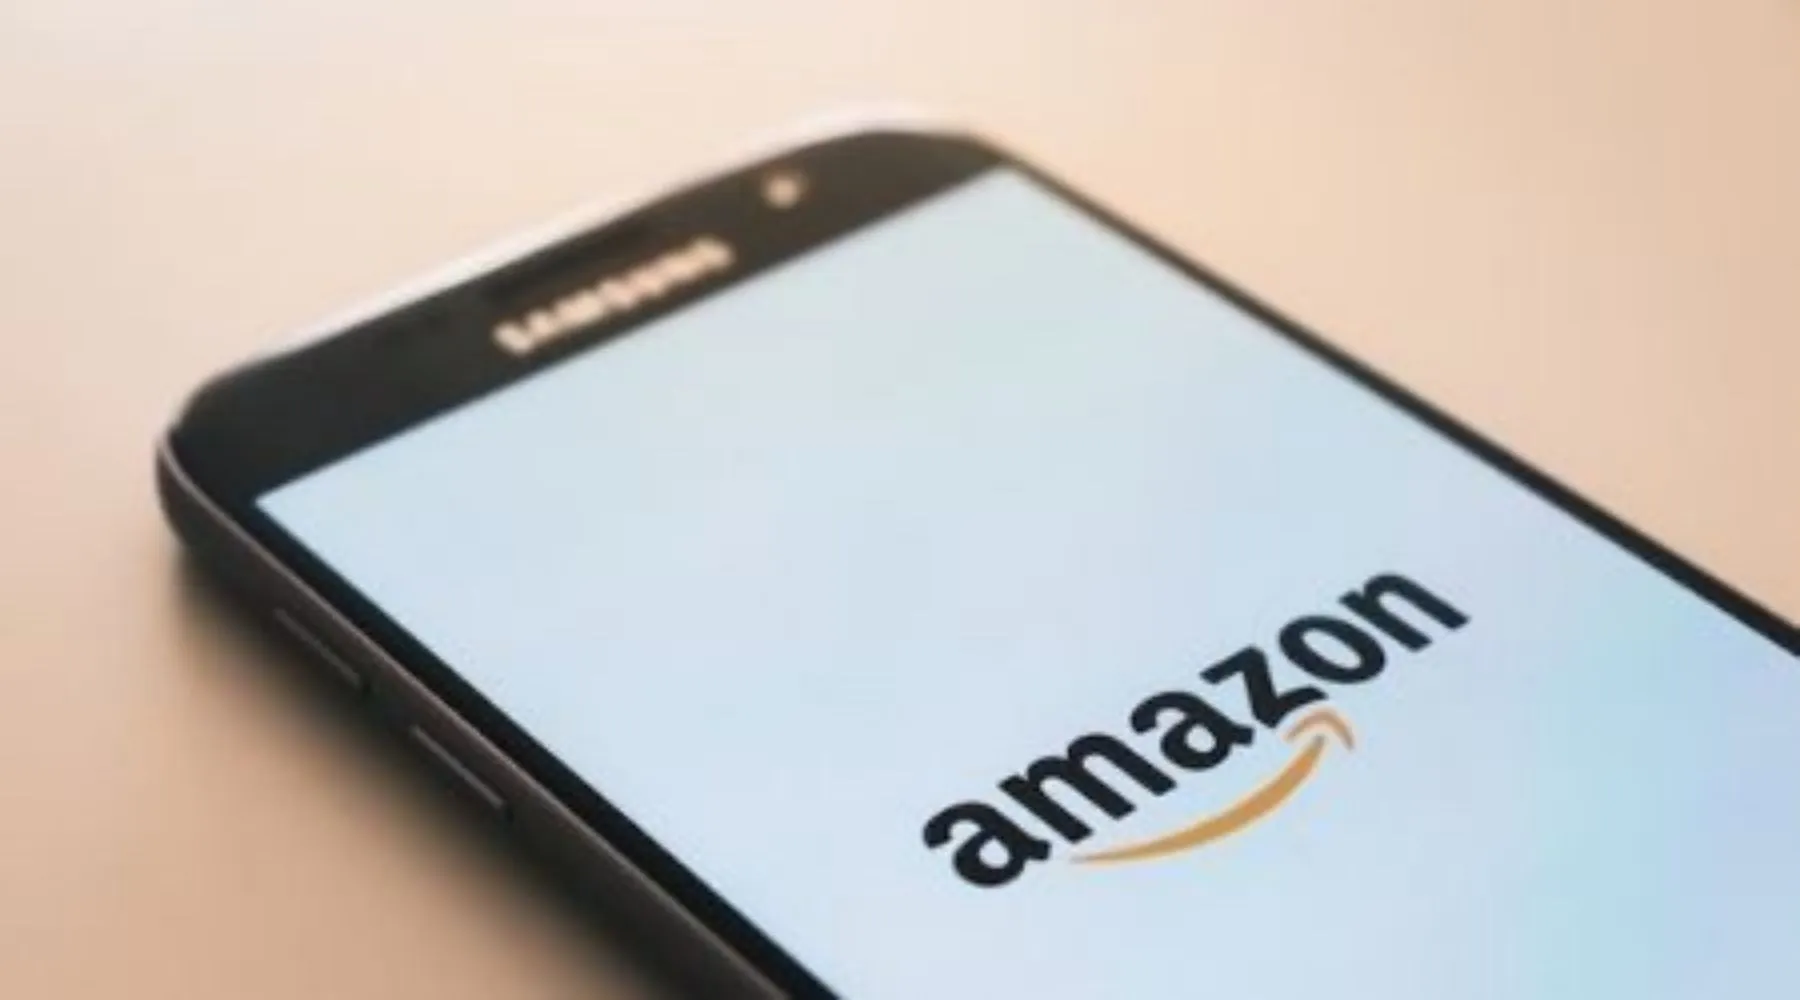 Amazon to stop accepting Visa credit cards from January 2022